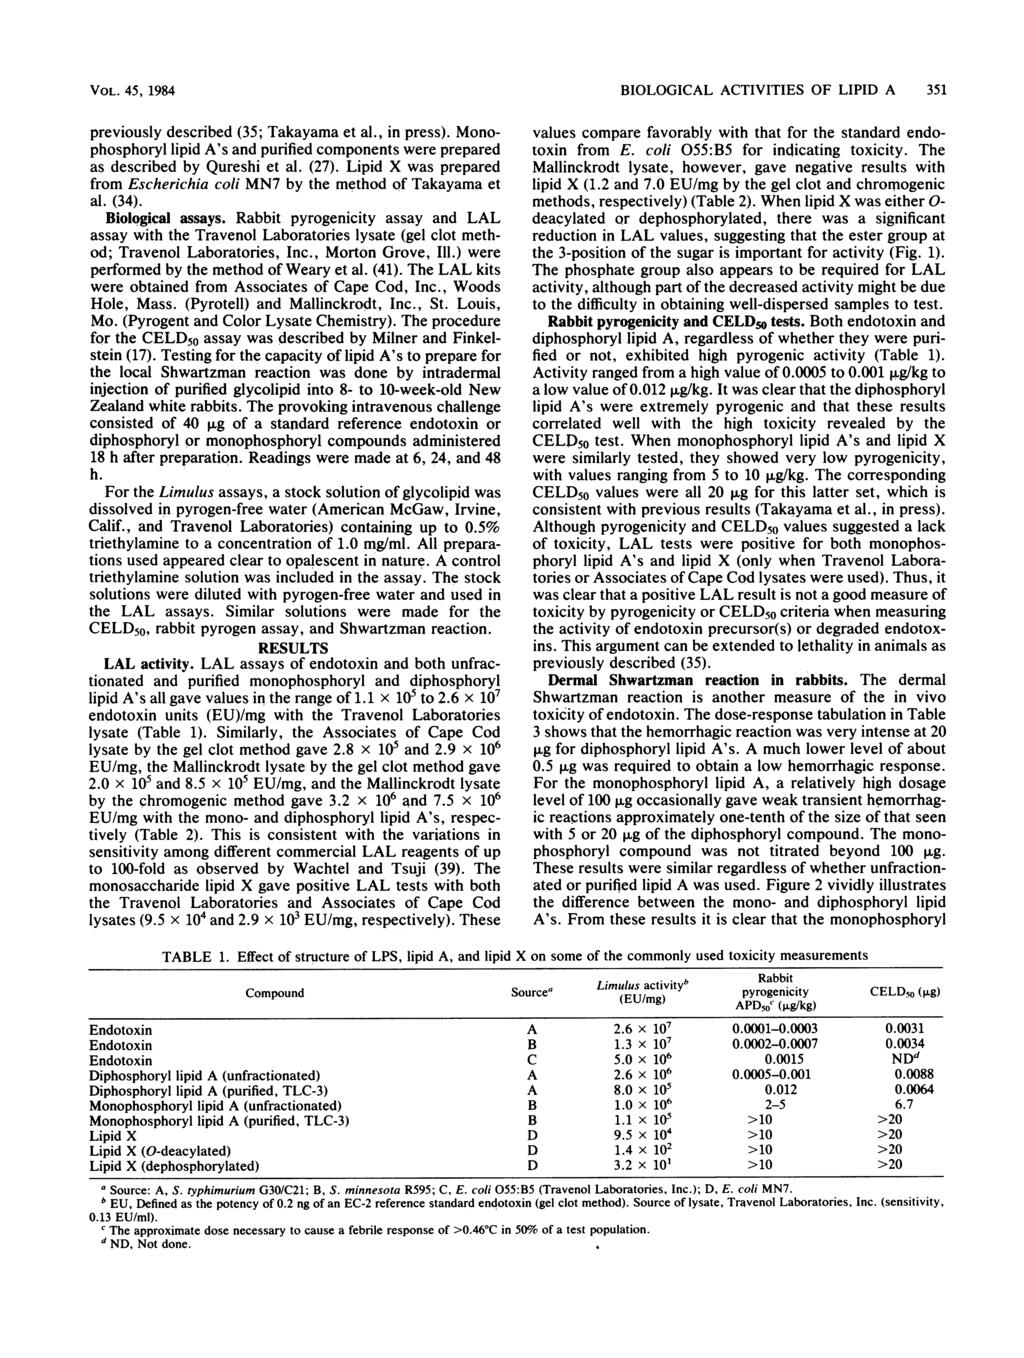 VOL. 45, 1984 previously described (35; Takayama et al., in press). Monophosphoryl lipid A's and purified components were prepared as described by Qureshi et al. (27).